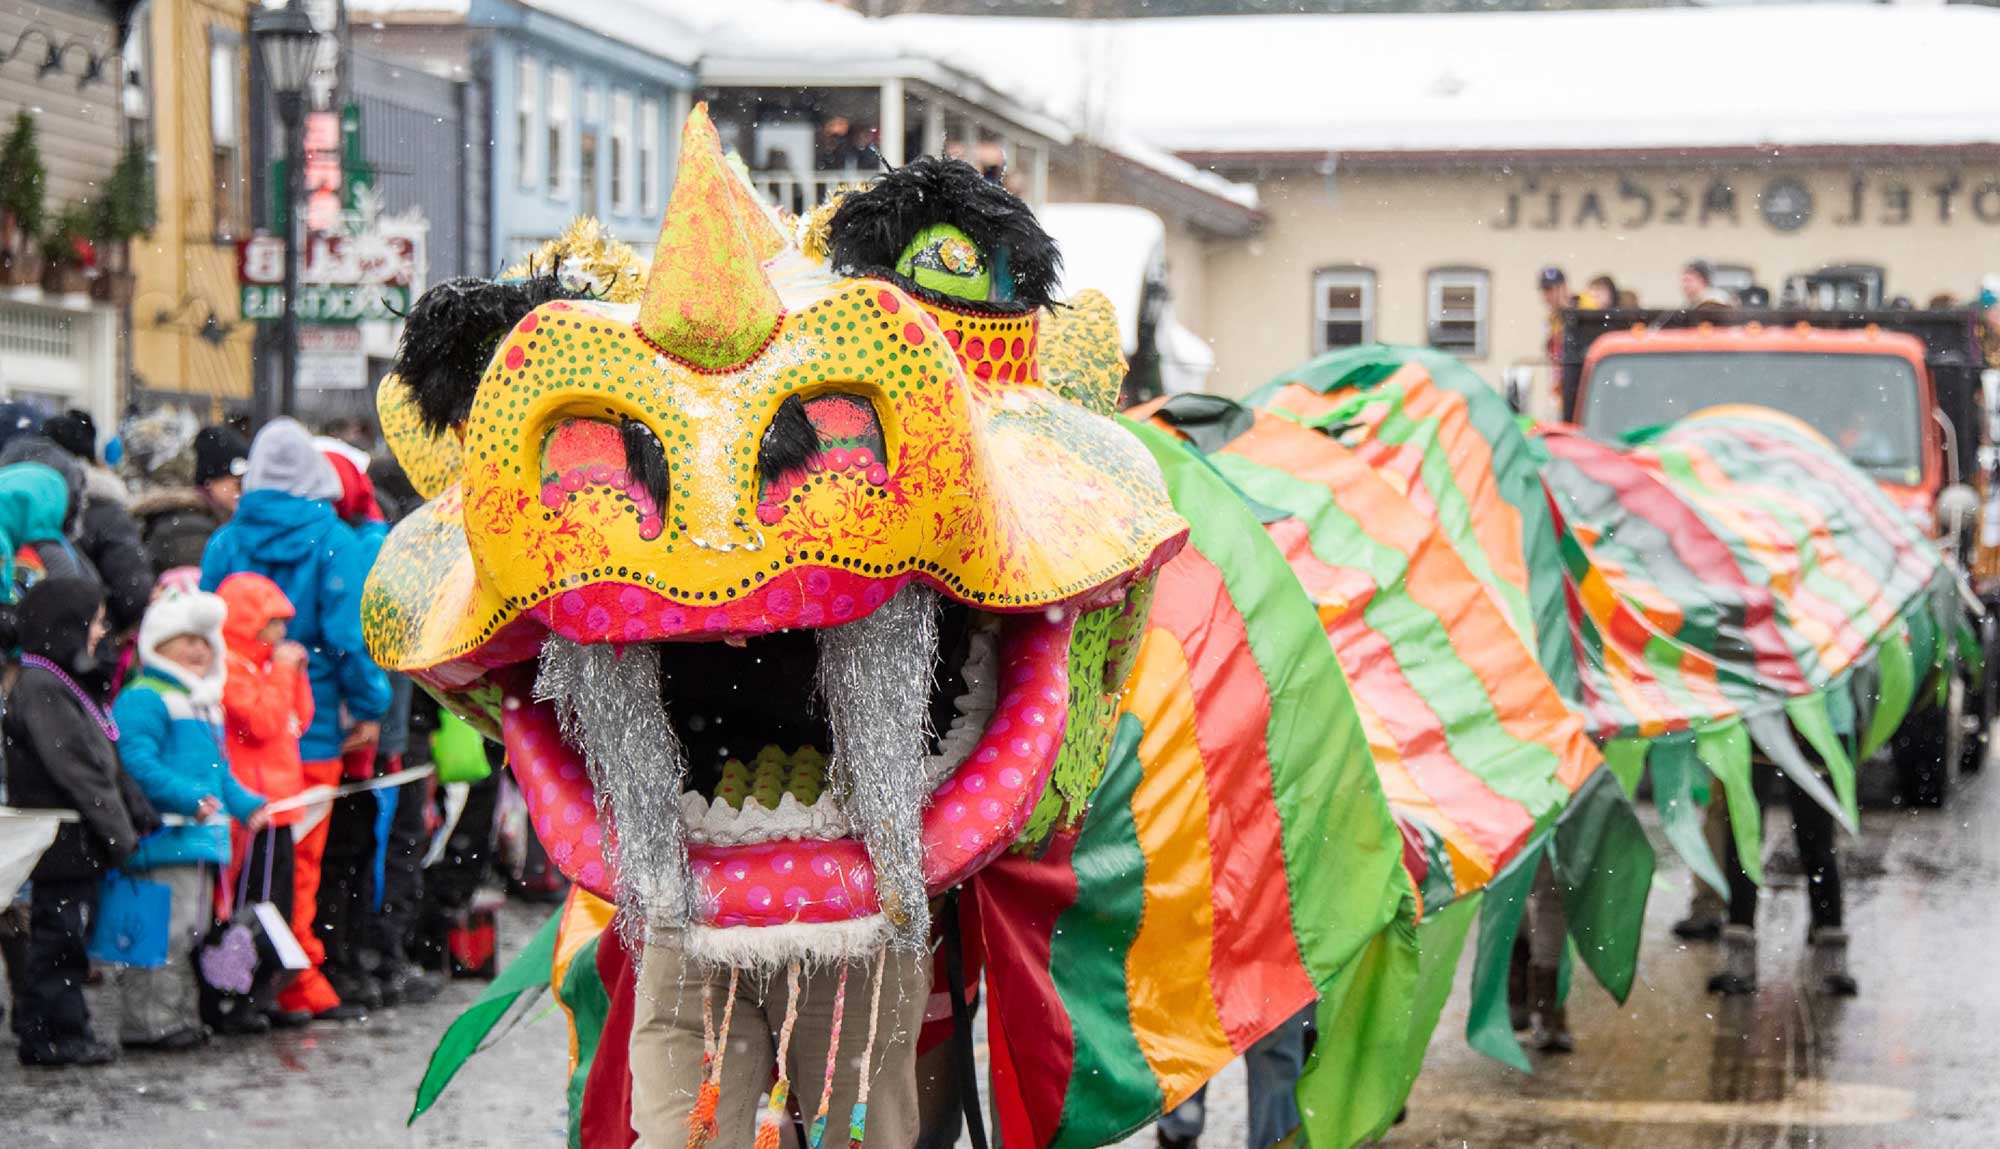 A colorful Chinese dragon dances through a snowy parade.